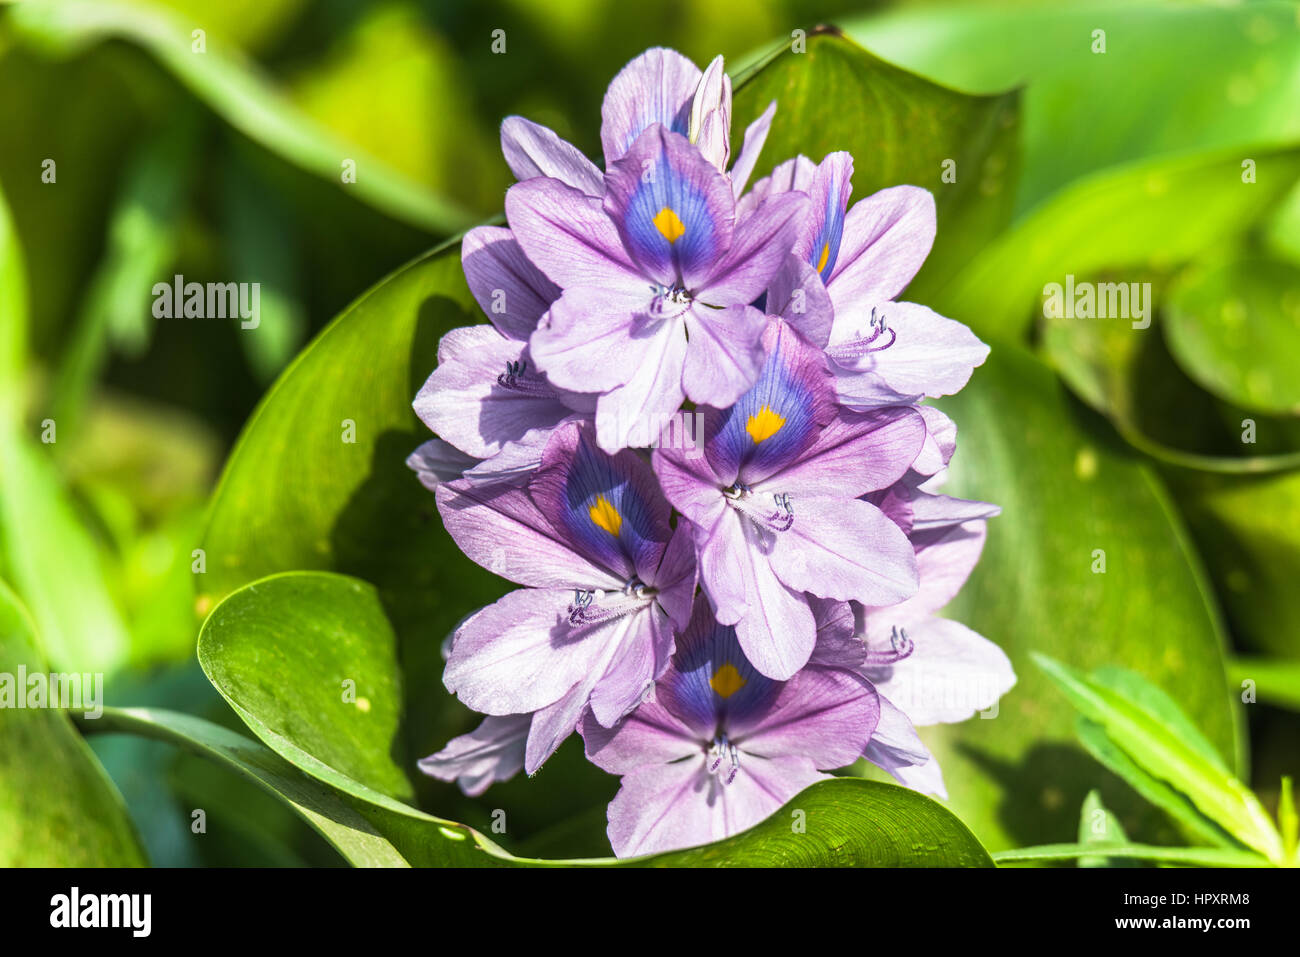 Eichhornia crassipes or Common water hyacinth flower a beautiful and attractive flowers Stock Photo